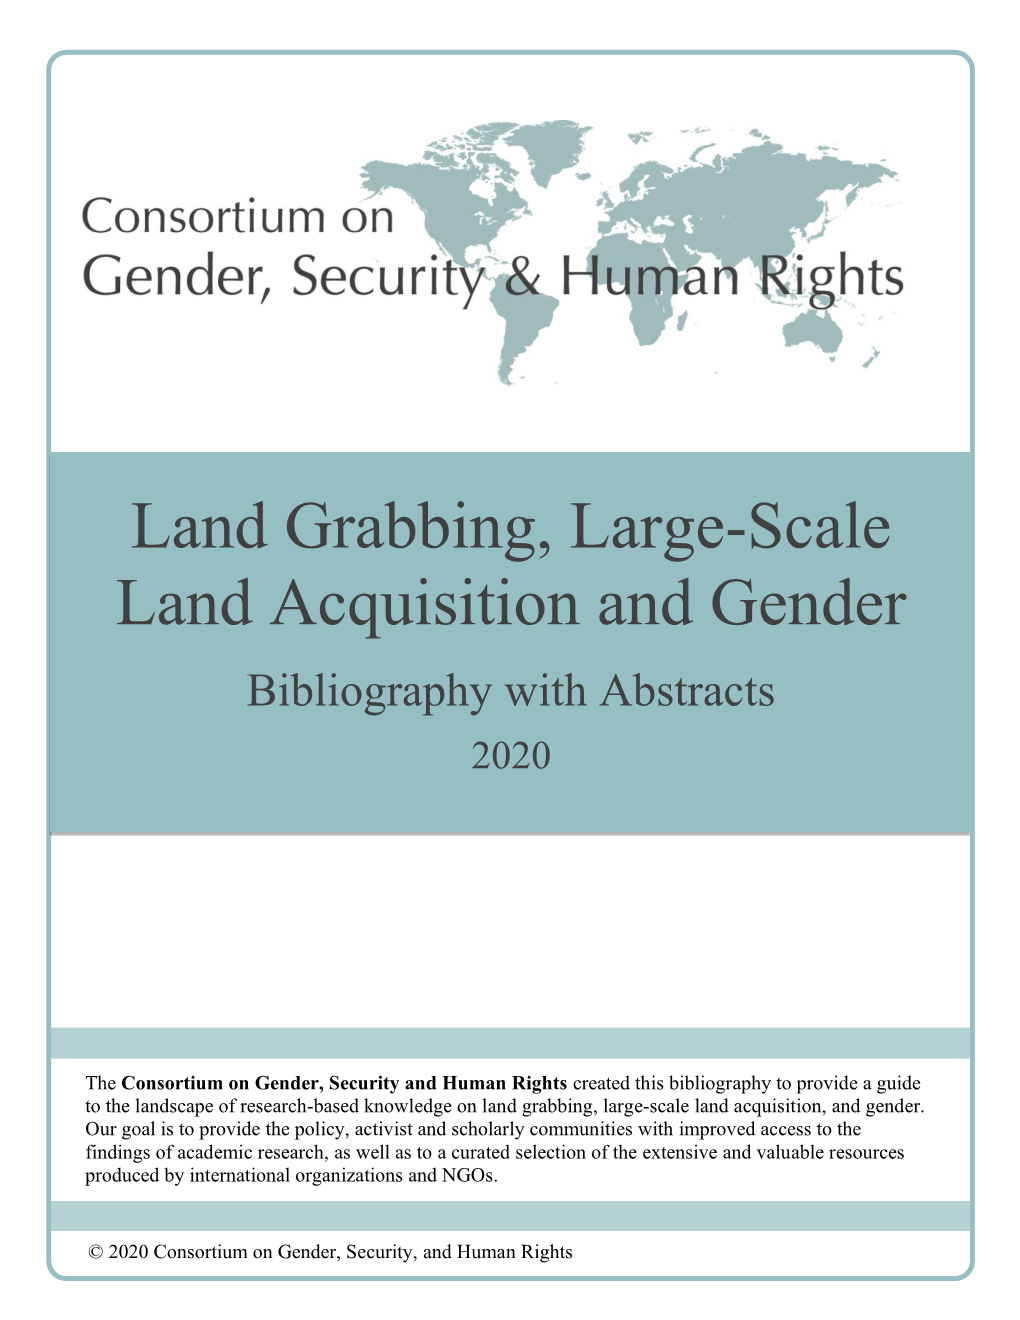 Land Grabbing, Large-Scale Land Acquisition and Gender